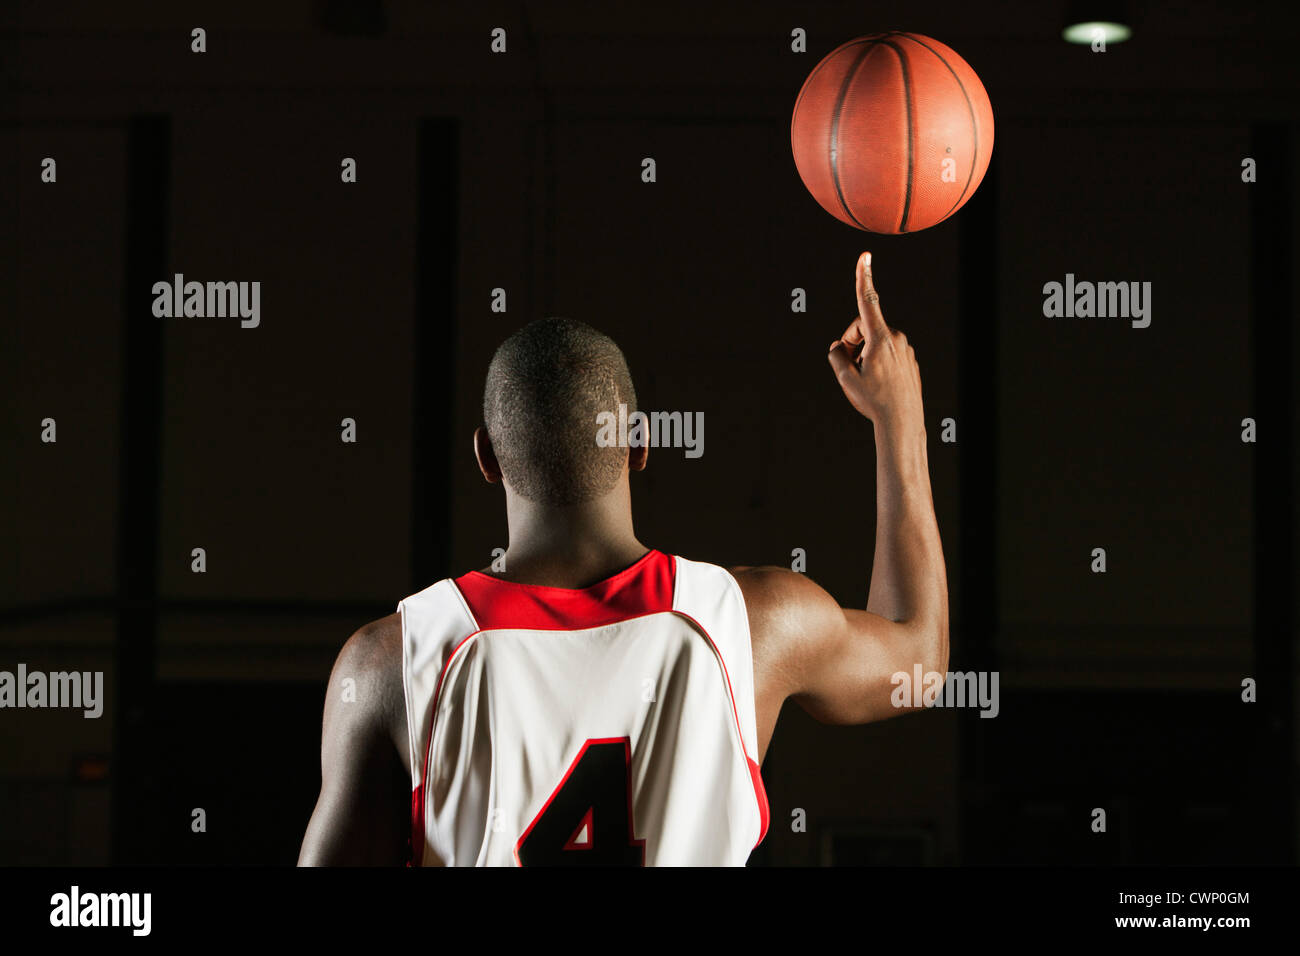 Basketball player spinning basketball atop finger, rear view Stock Photo